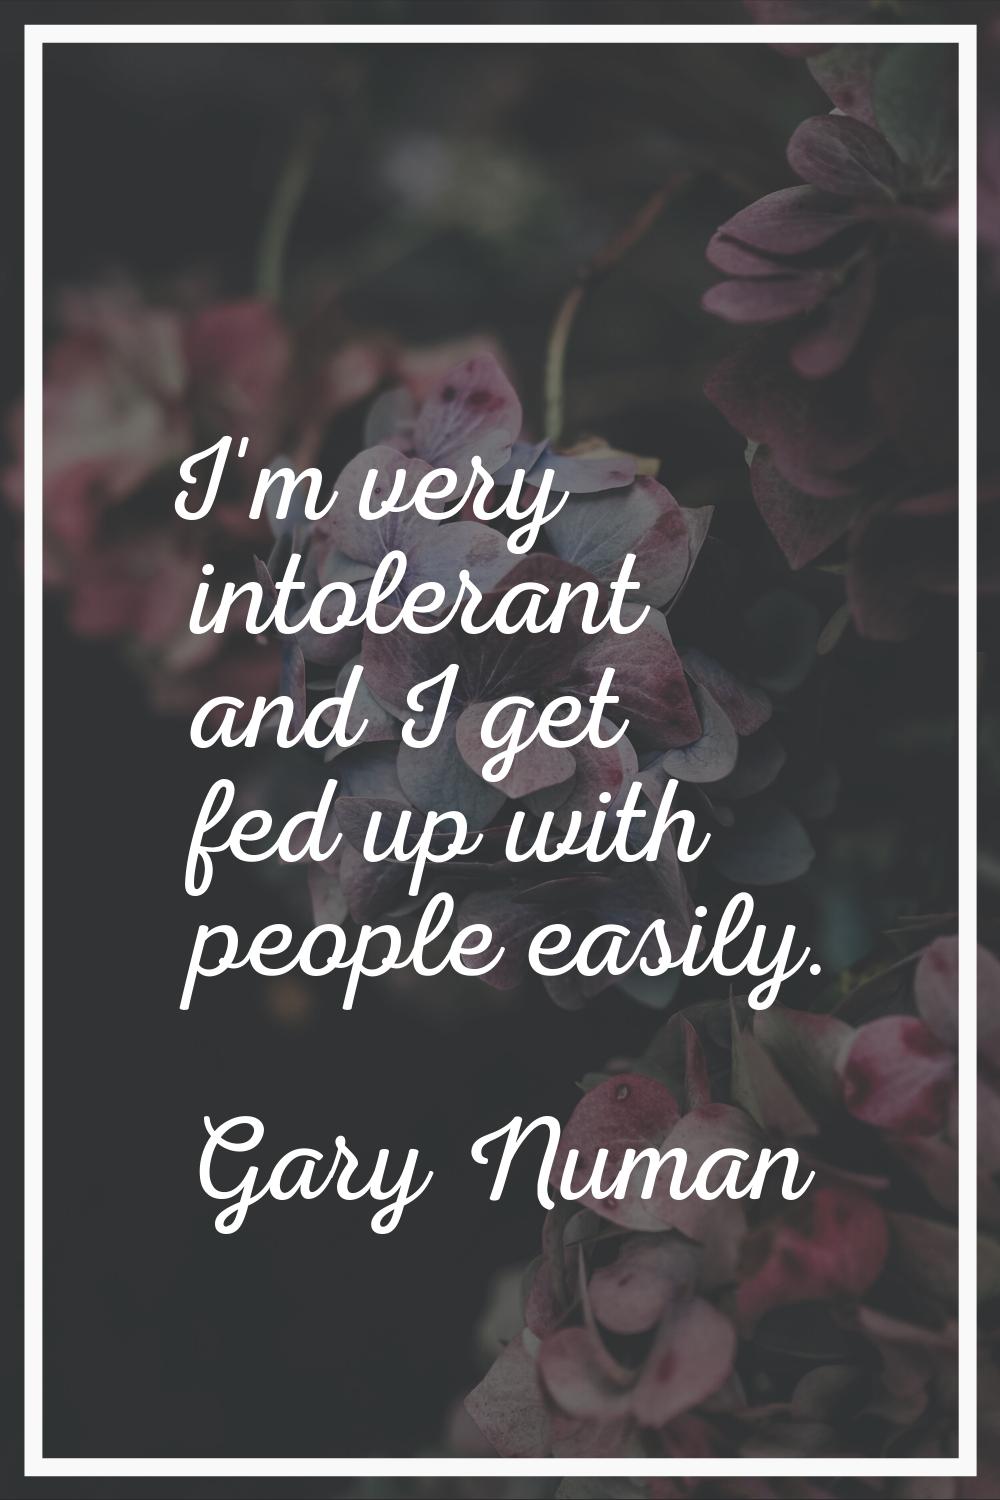 I'm very intolerant and I get fed up with people easily.